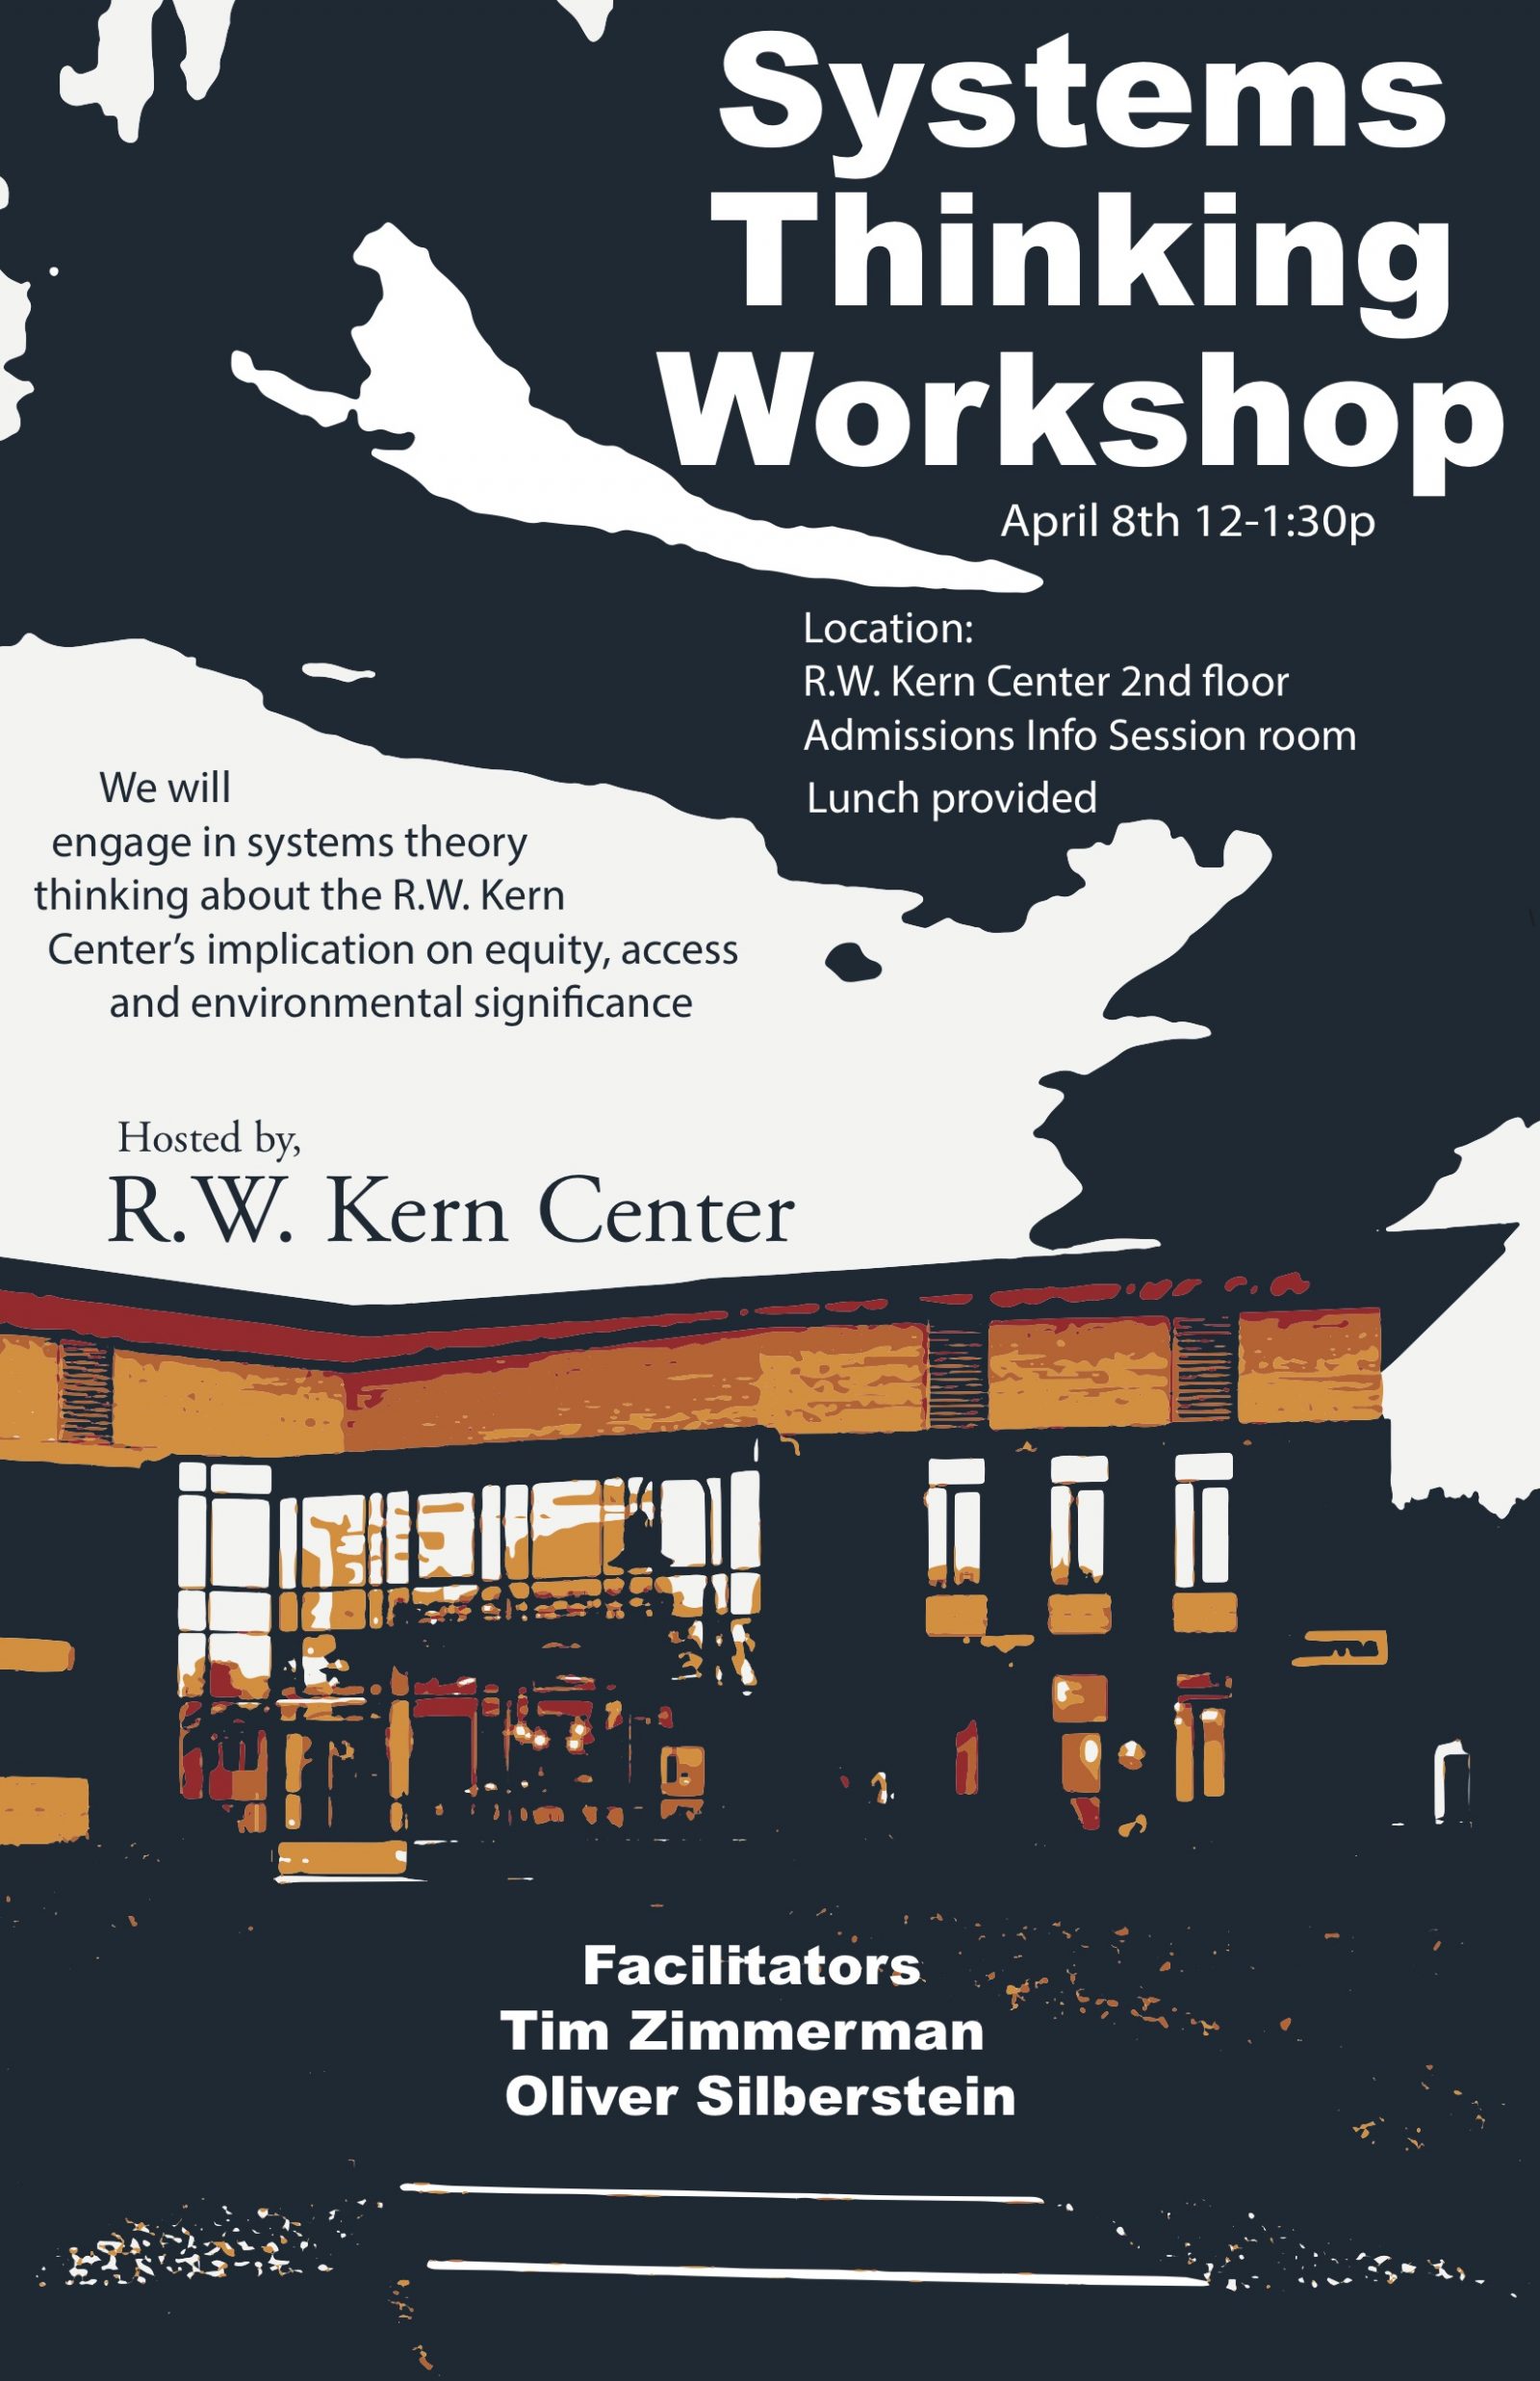 Event poster, a moody illustration of the R.W. Kern Center